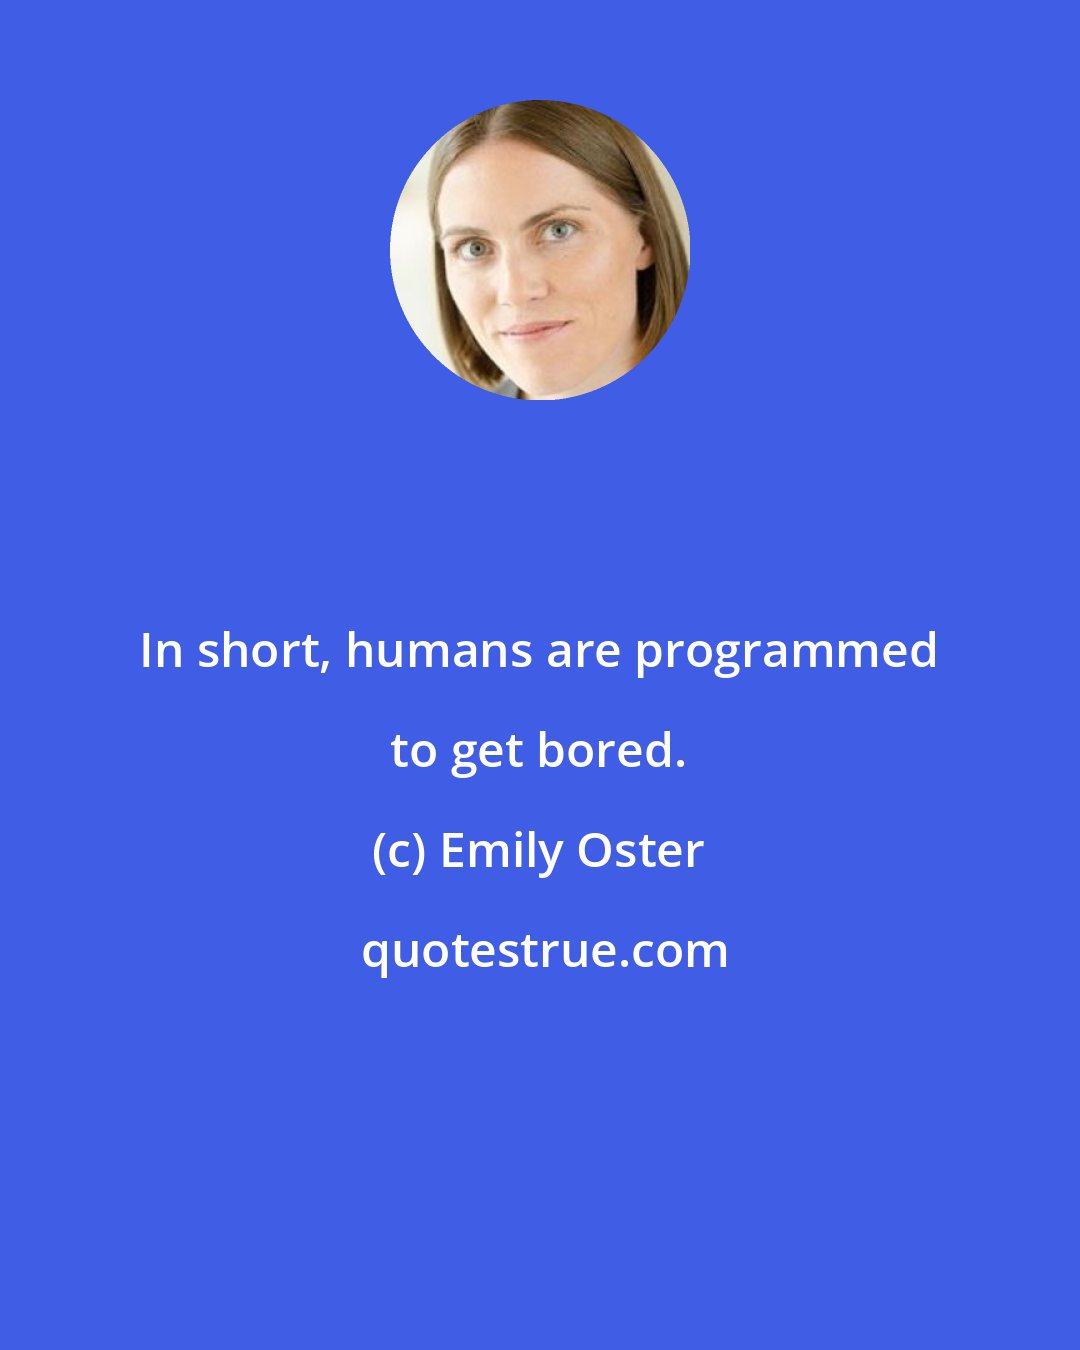 Emily Oster: In short, humans are programmed to get bored.